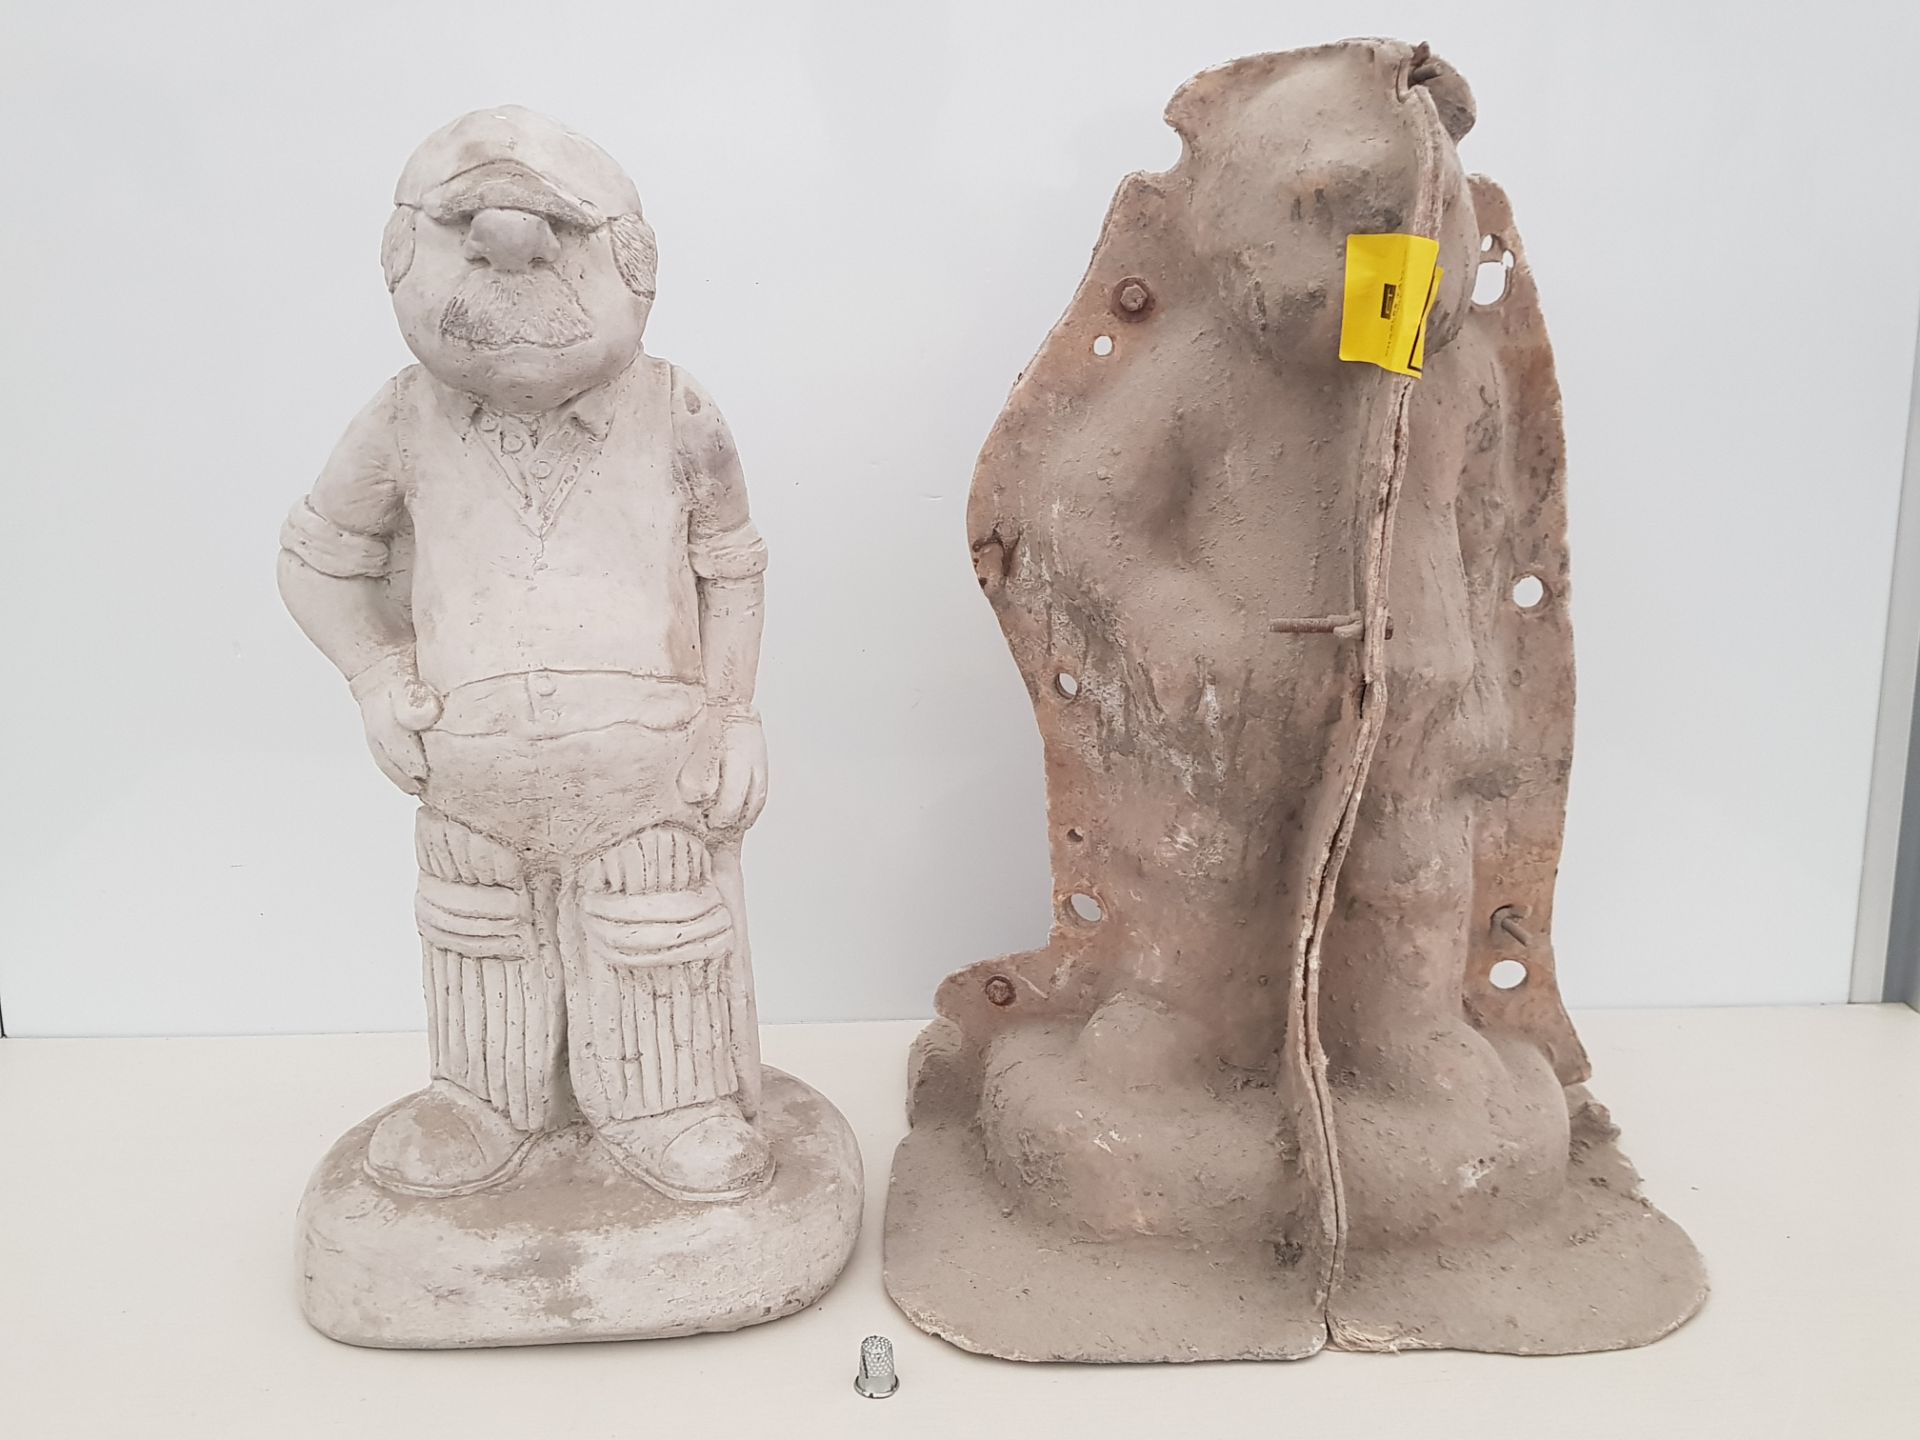 50 CM CRICKET BATSMAN MASTER CAST WITH LATEX SLIP & FIBRE GLASS MOULD (FOR CASTING PRODUCT TO RETAIL